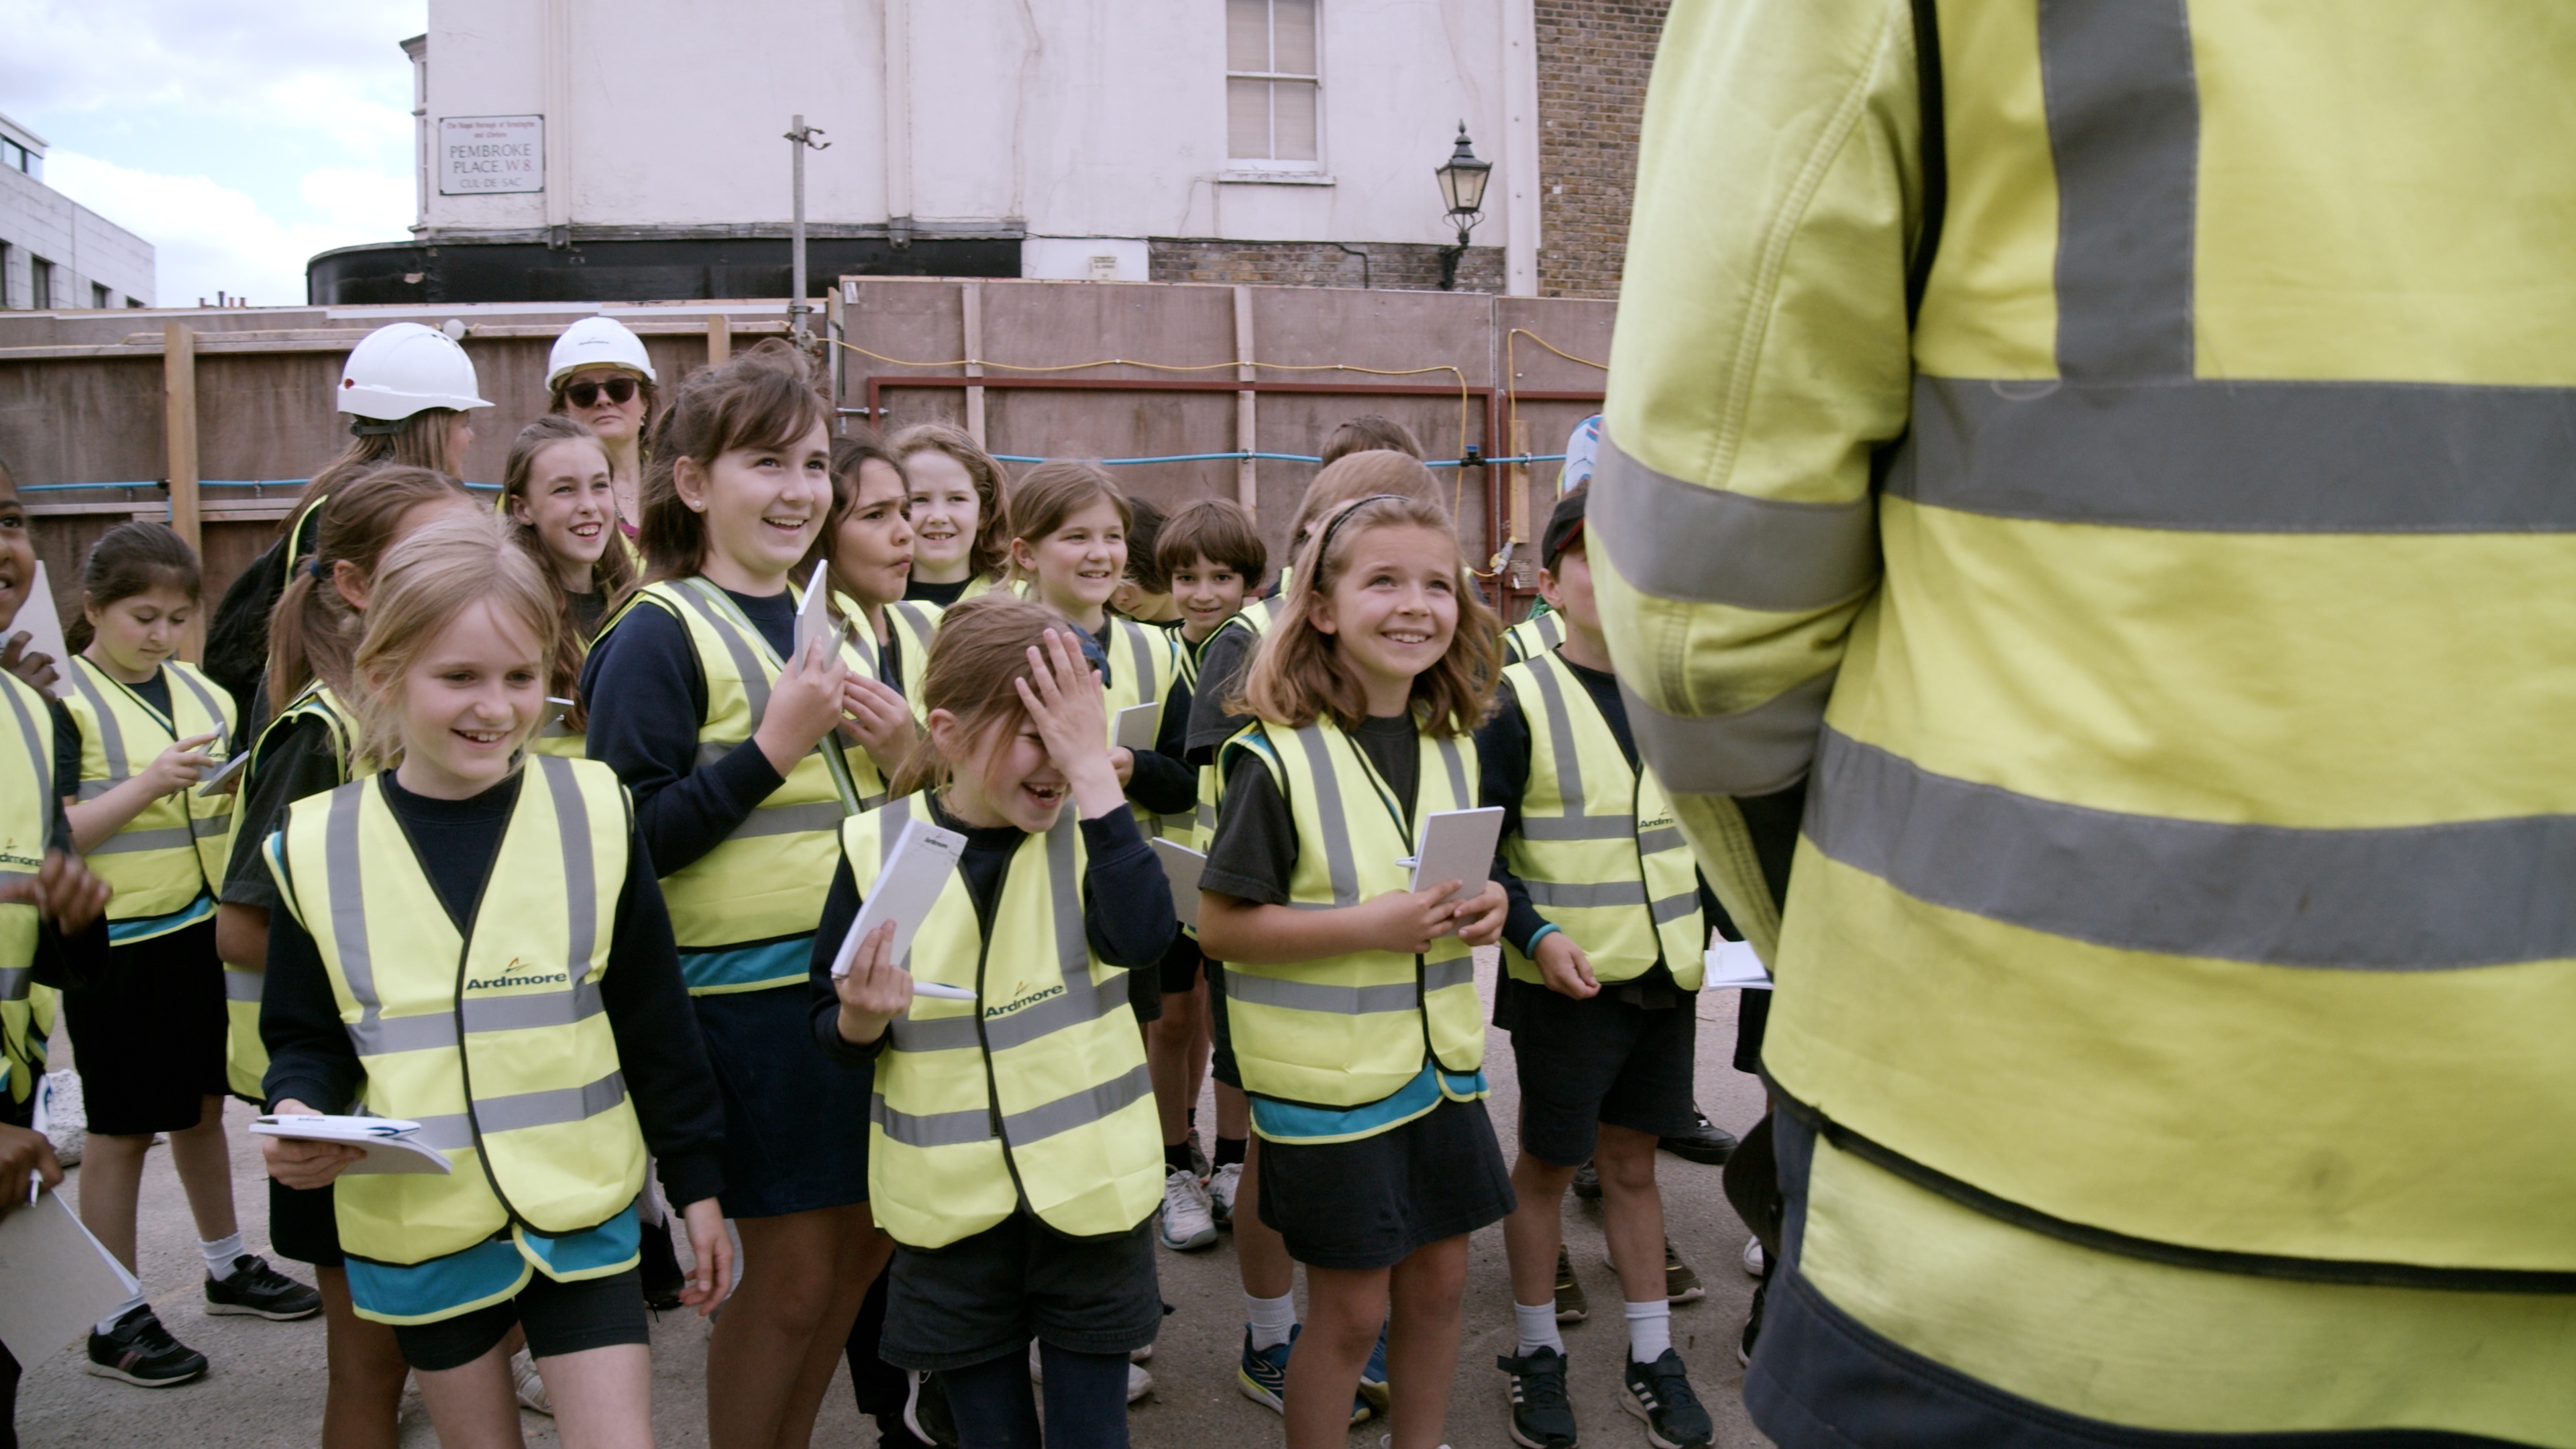 Students From St Peter’s Church Of England Primary School In Hammersmith Visiting The Holland Gate Development Project.